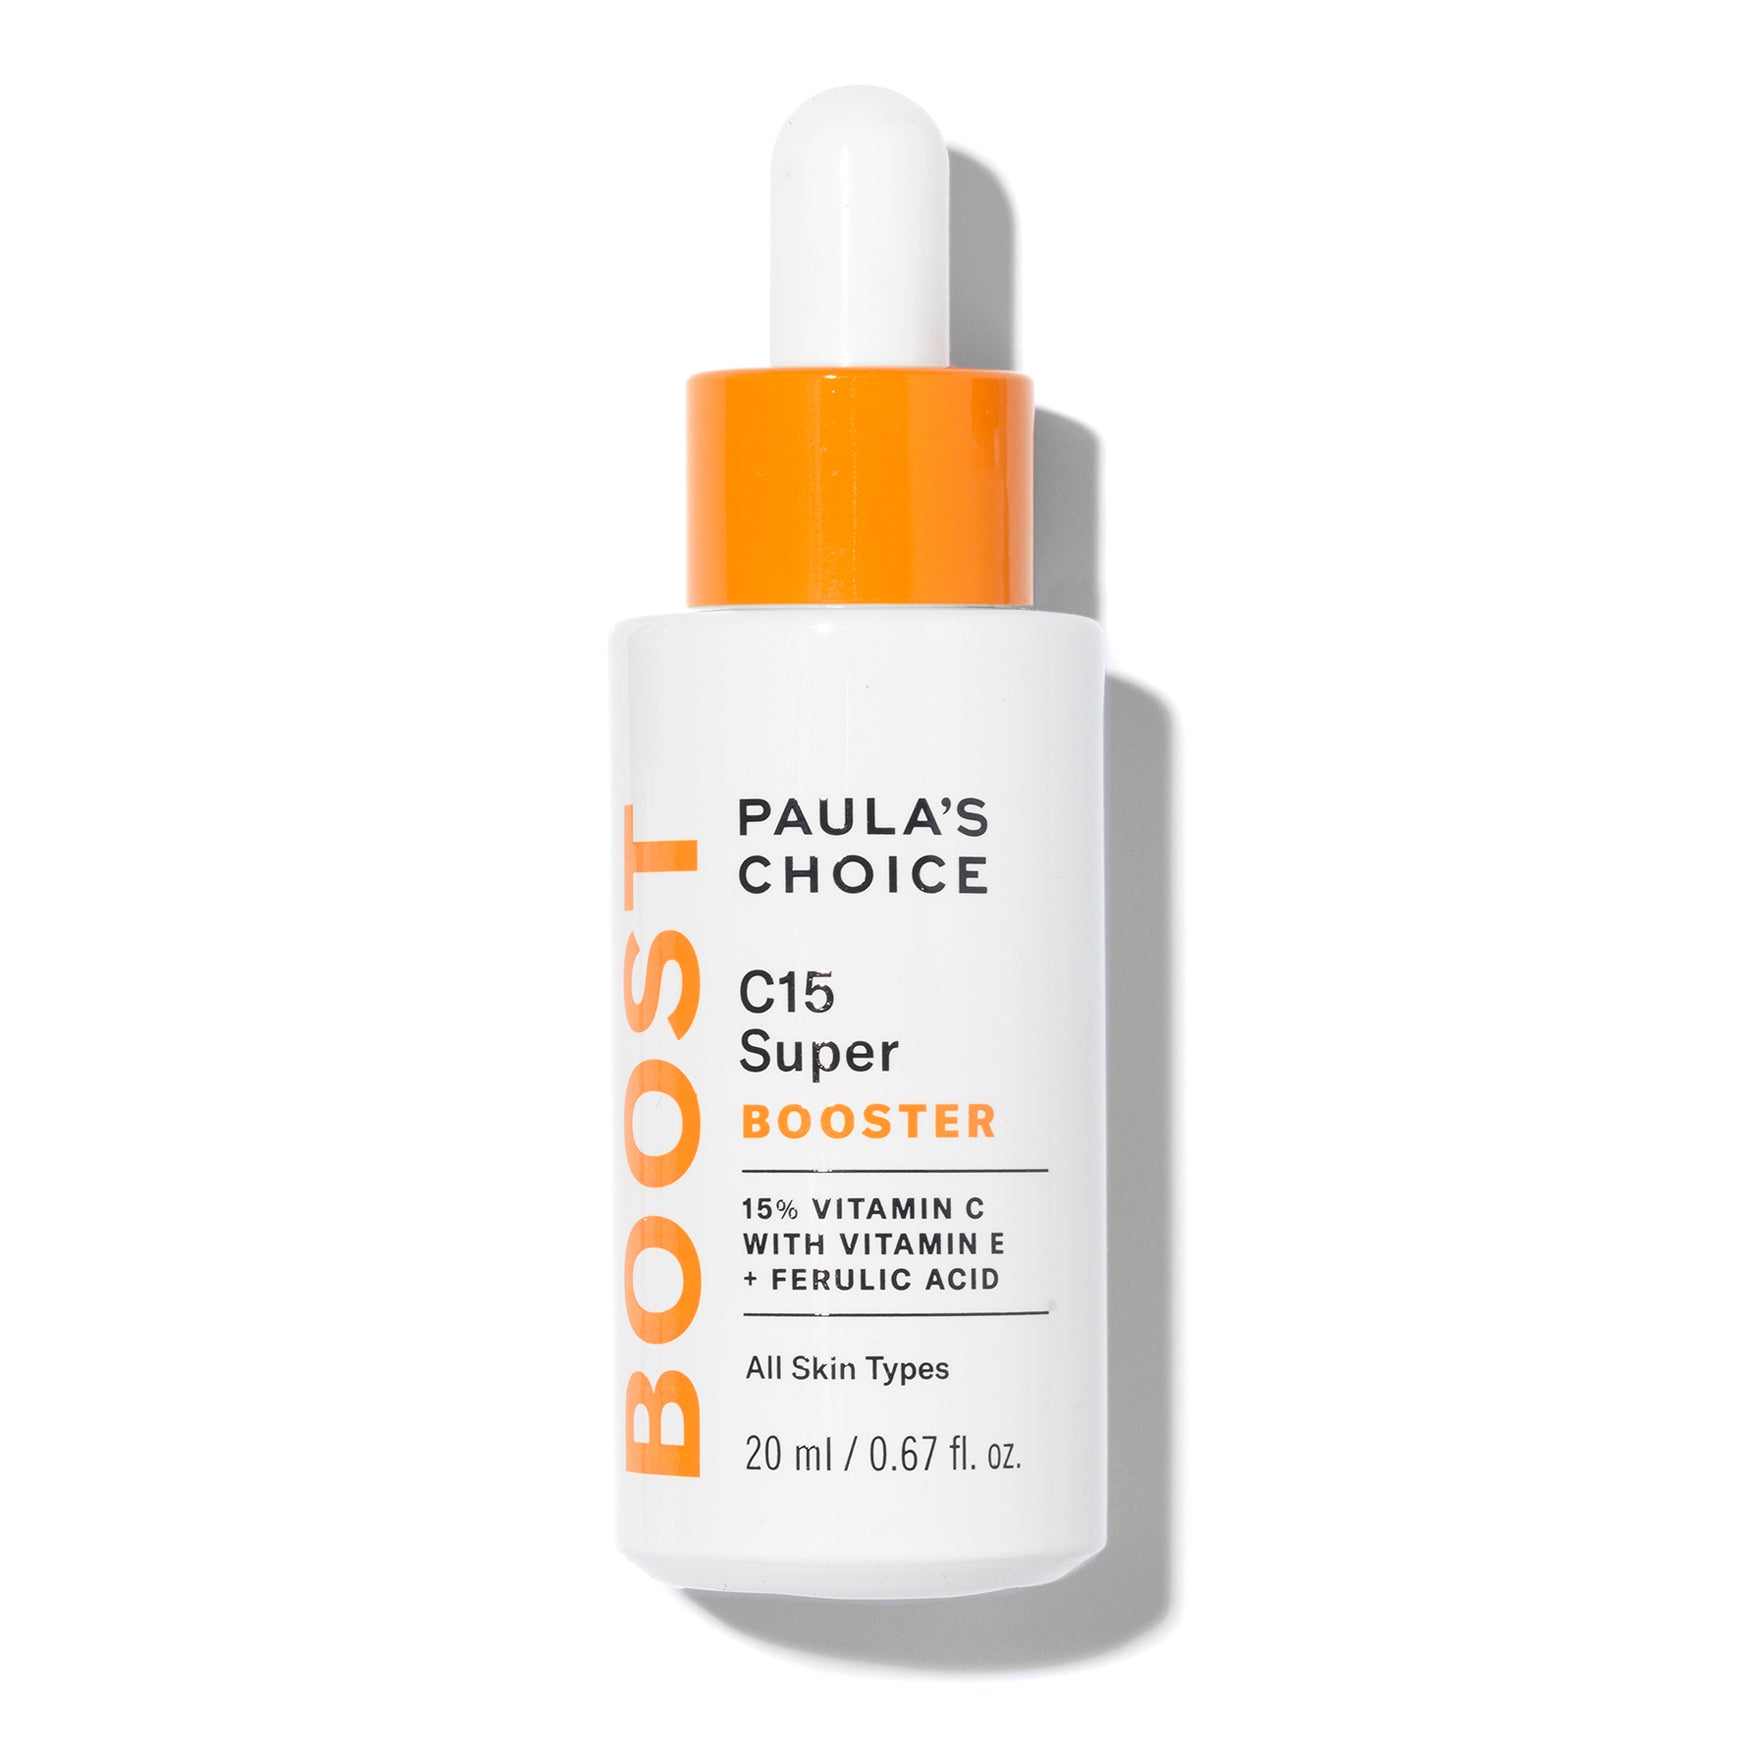 Paula's Super Booster – Factor of